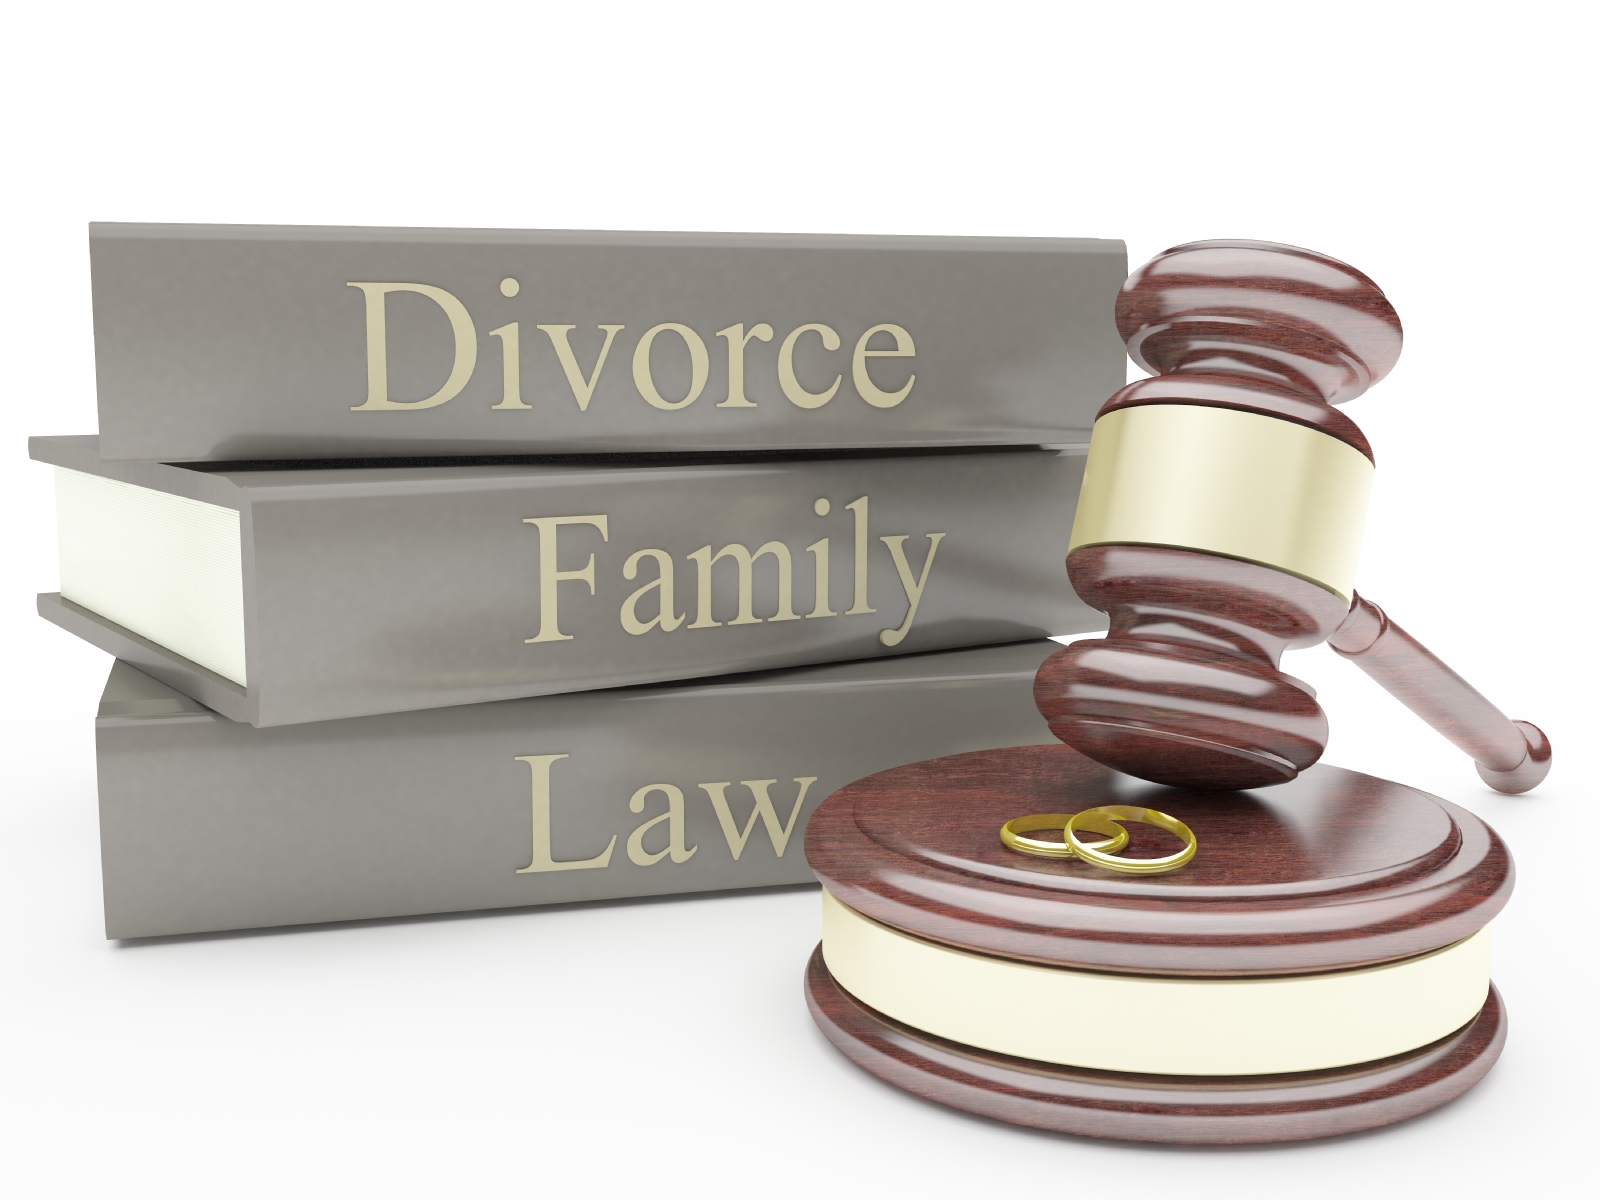 New Way family lawyers